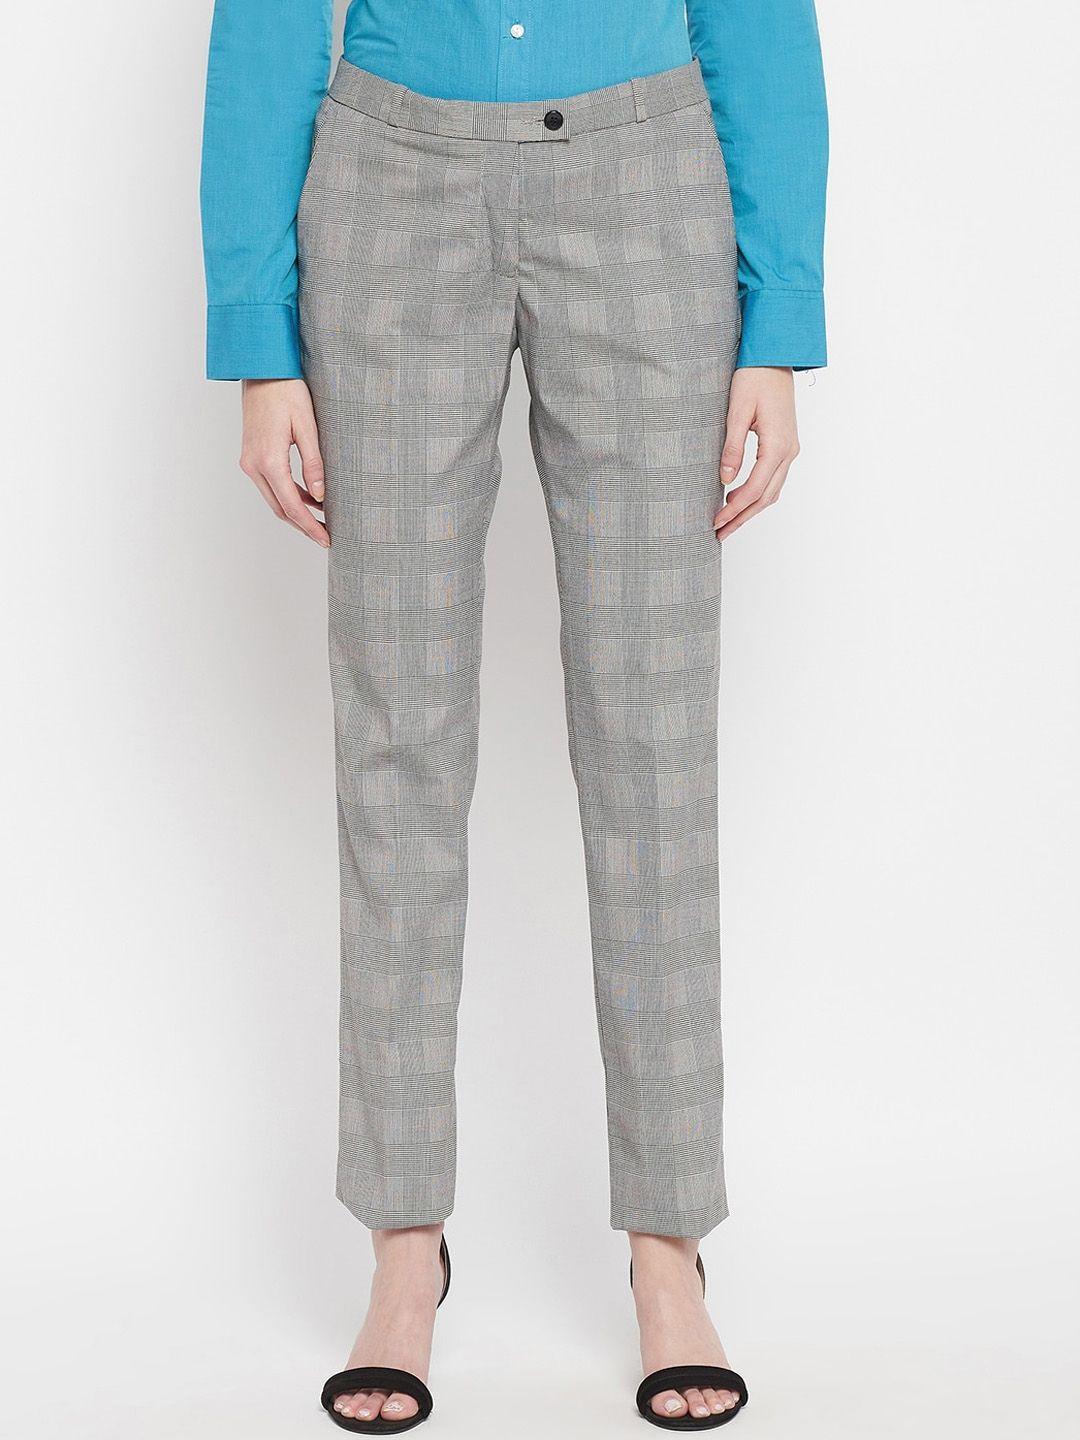 crozo-by-cantabil-women-grey-checked-formal-trouser